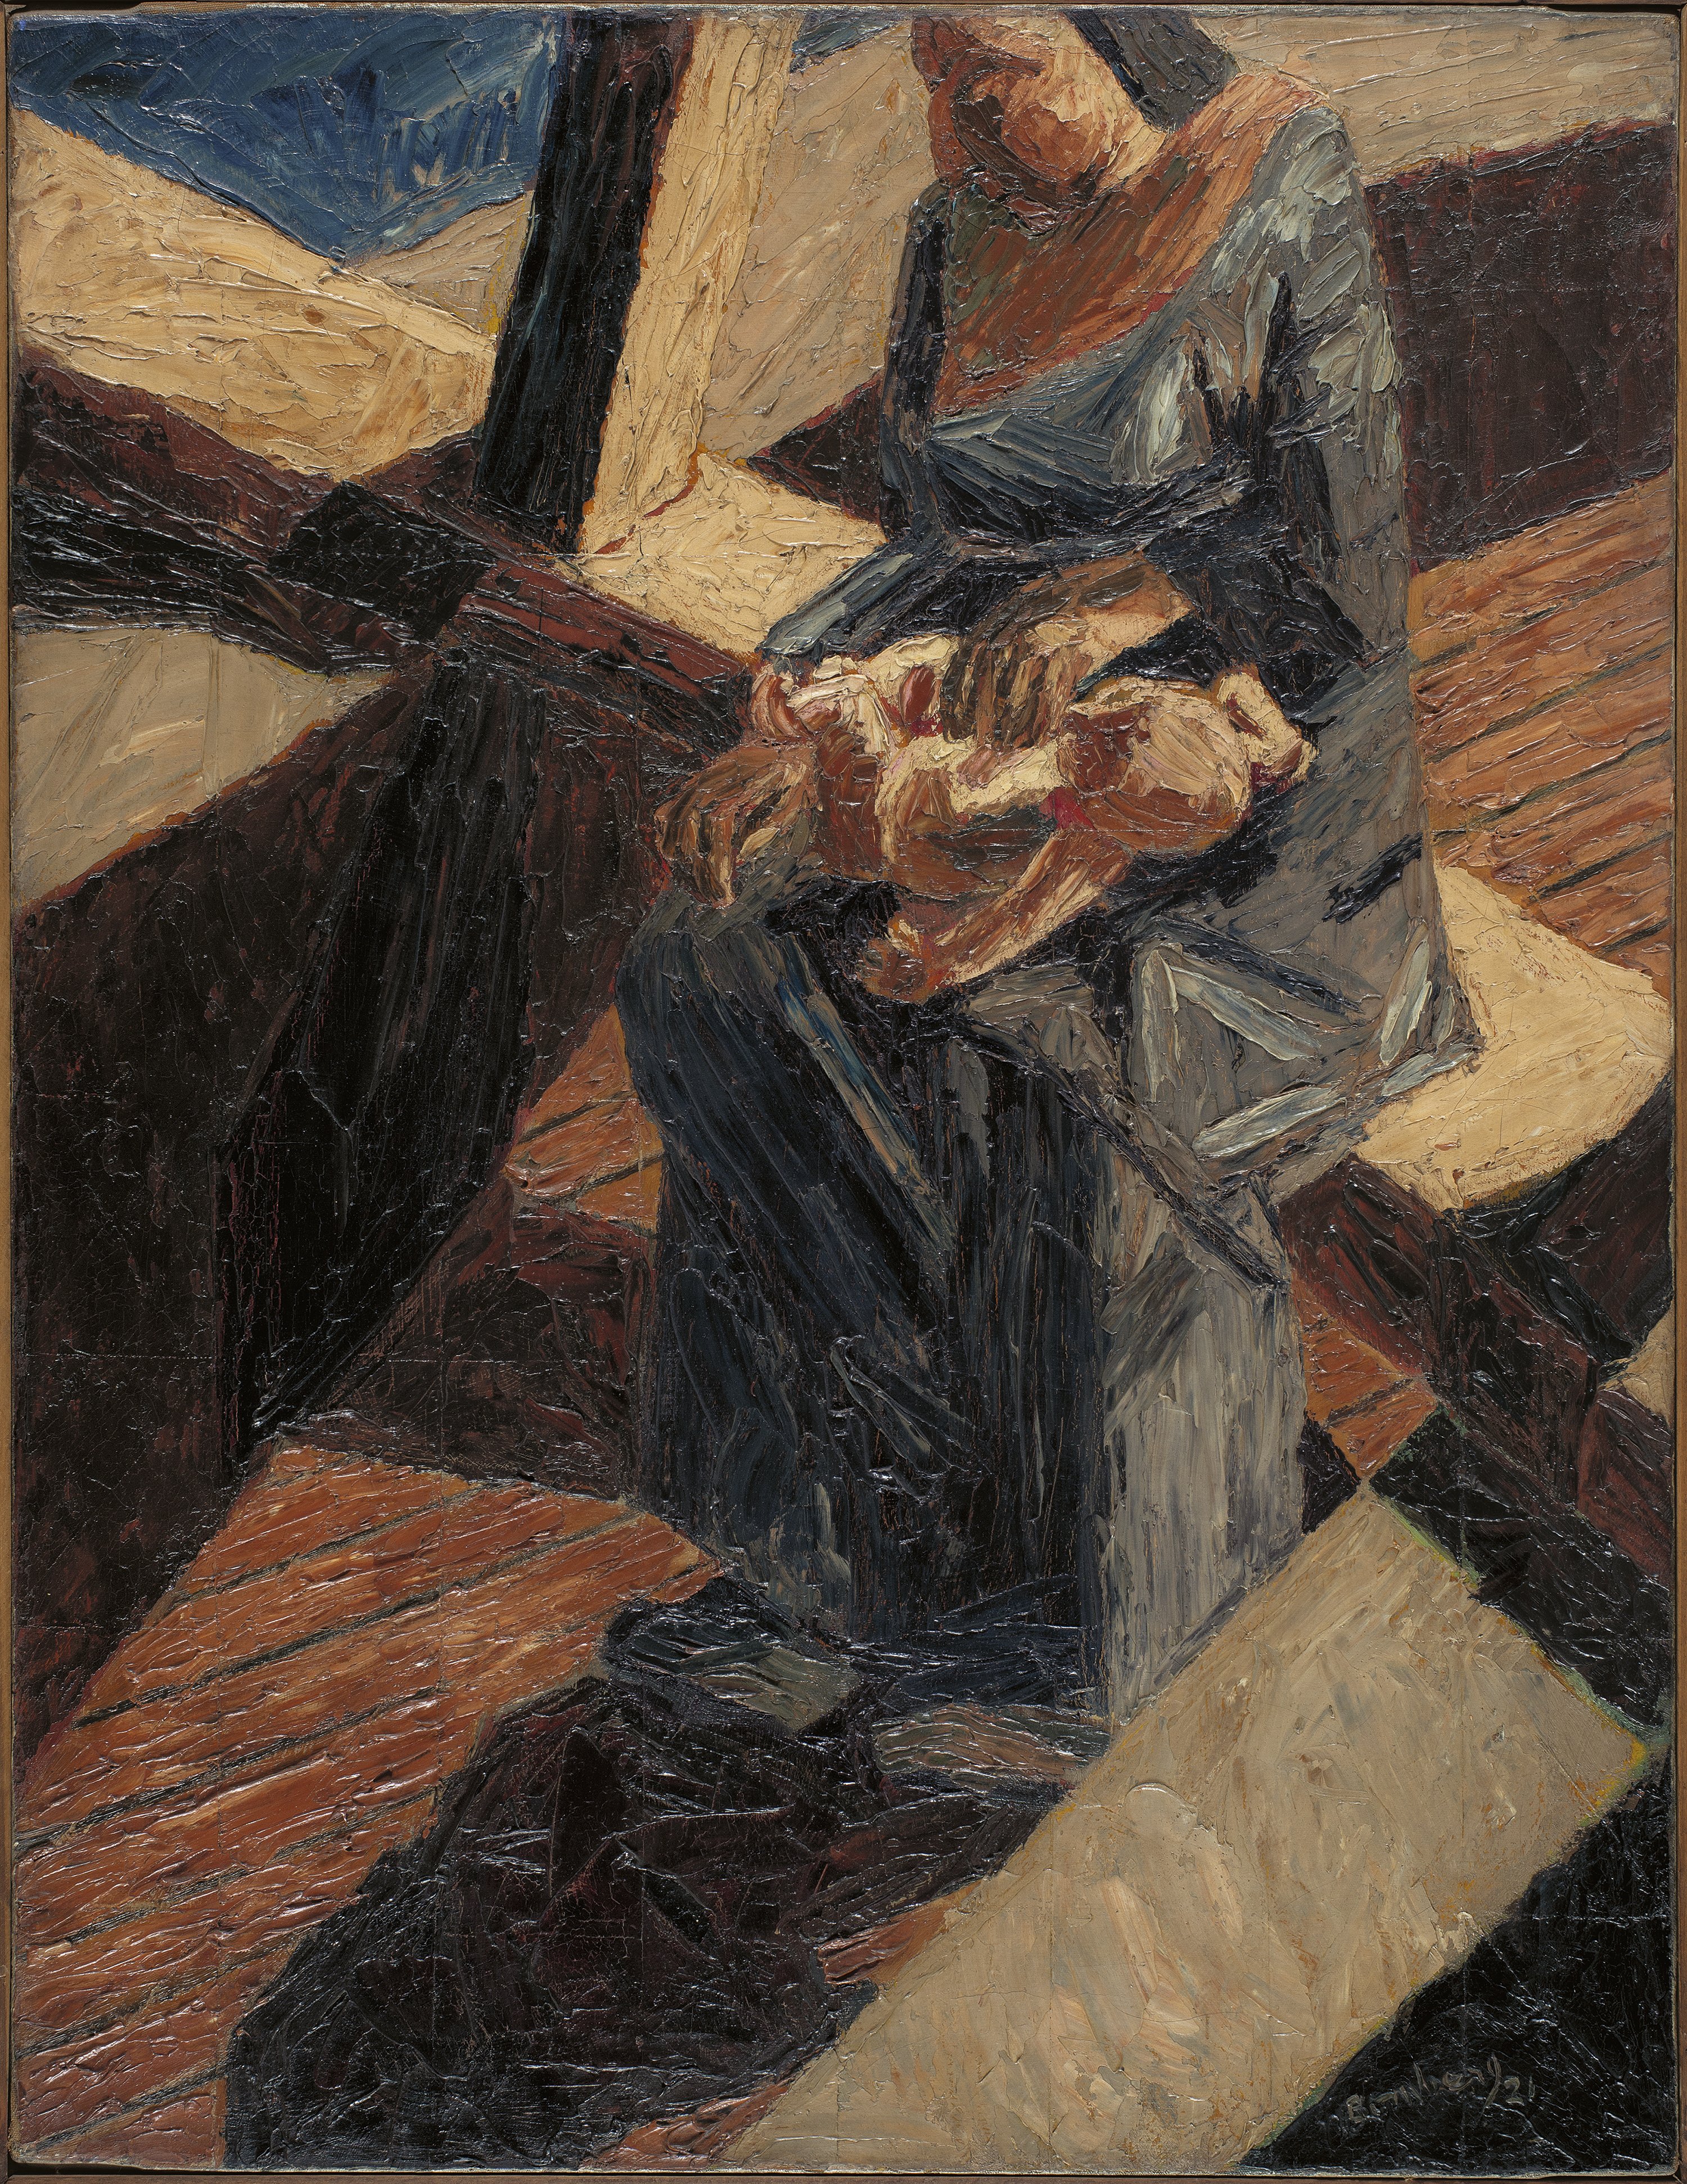 Bargee (Mother and Child). Barquera (Madre y niño), 1921